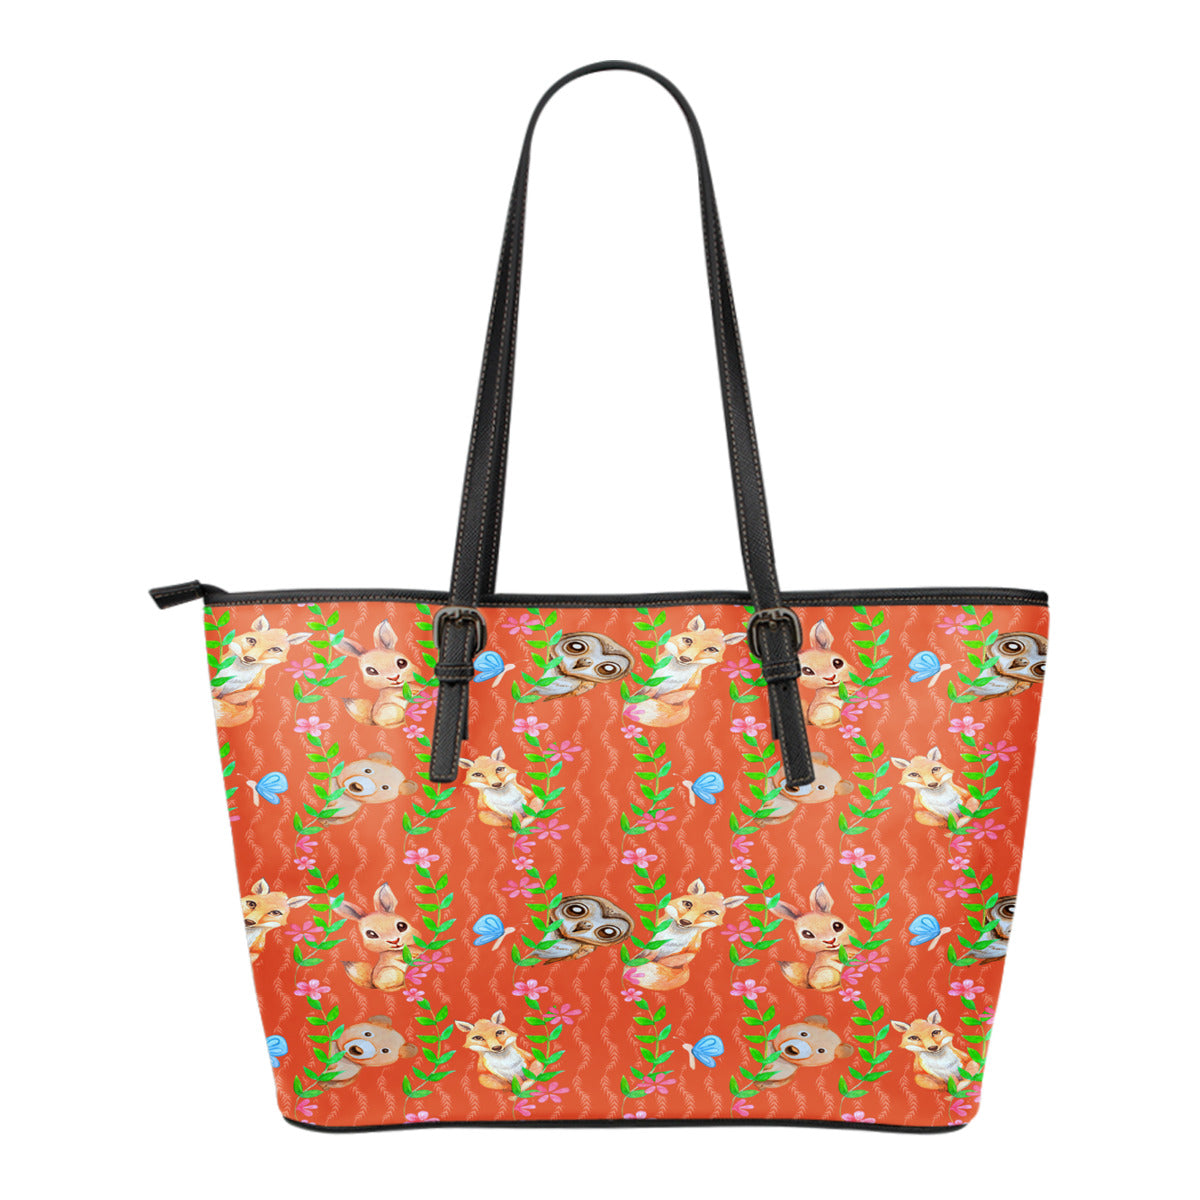 Woodland Themed Design C7 Women Small Leather Tote Bag